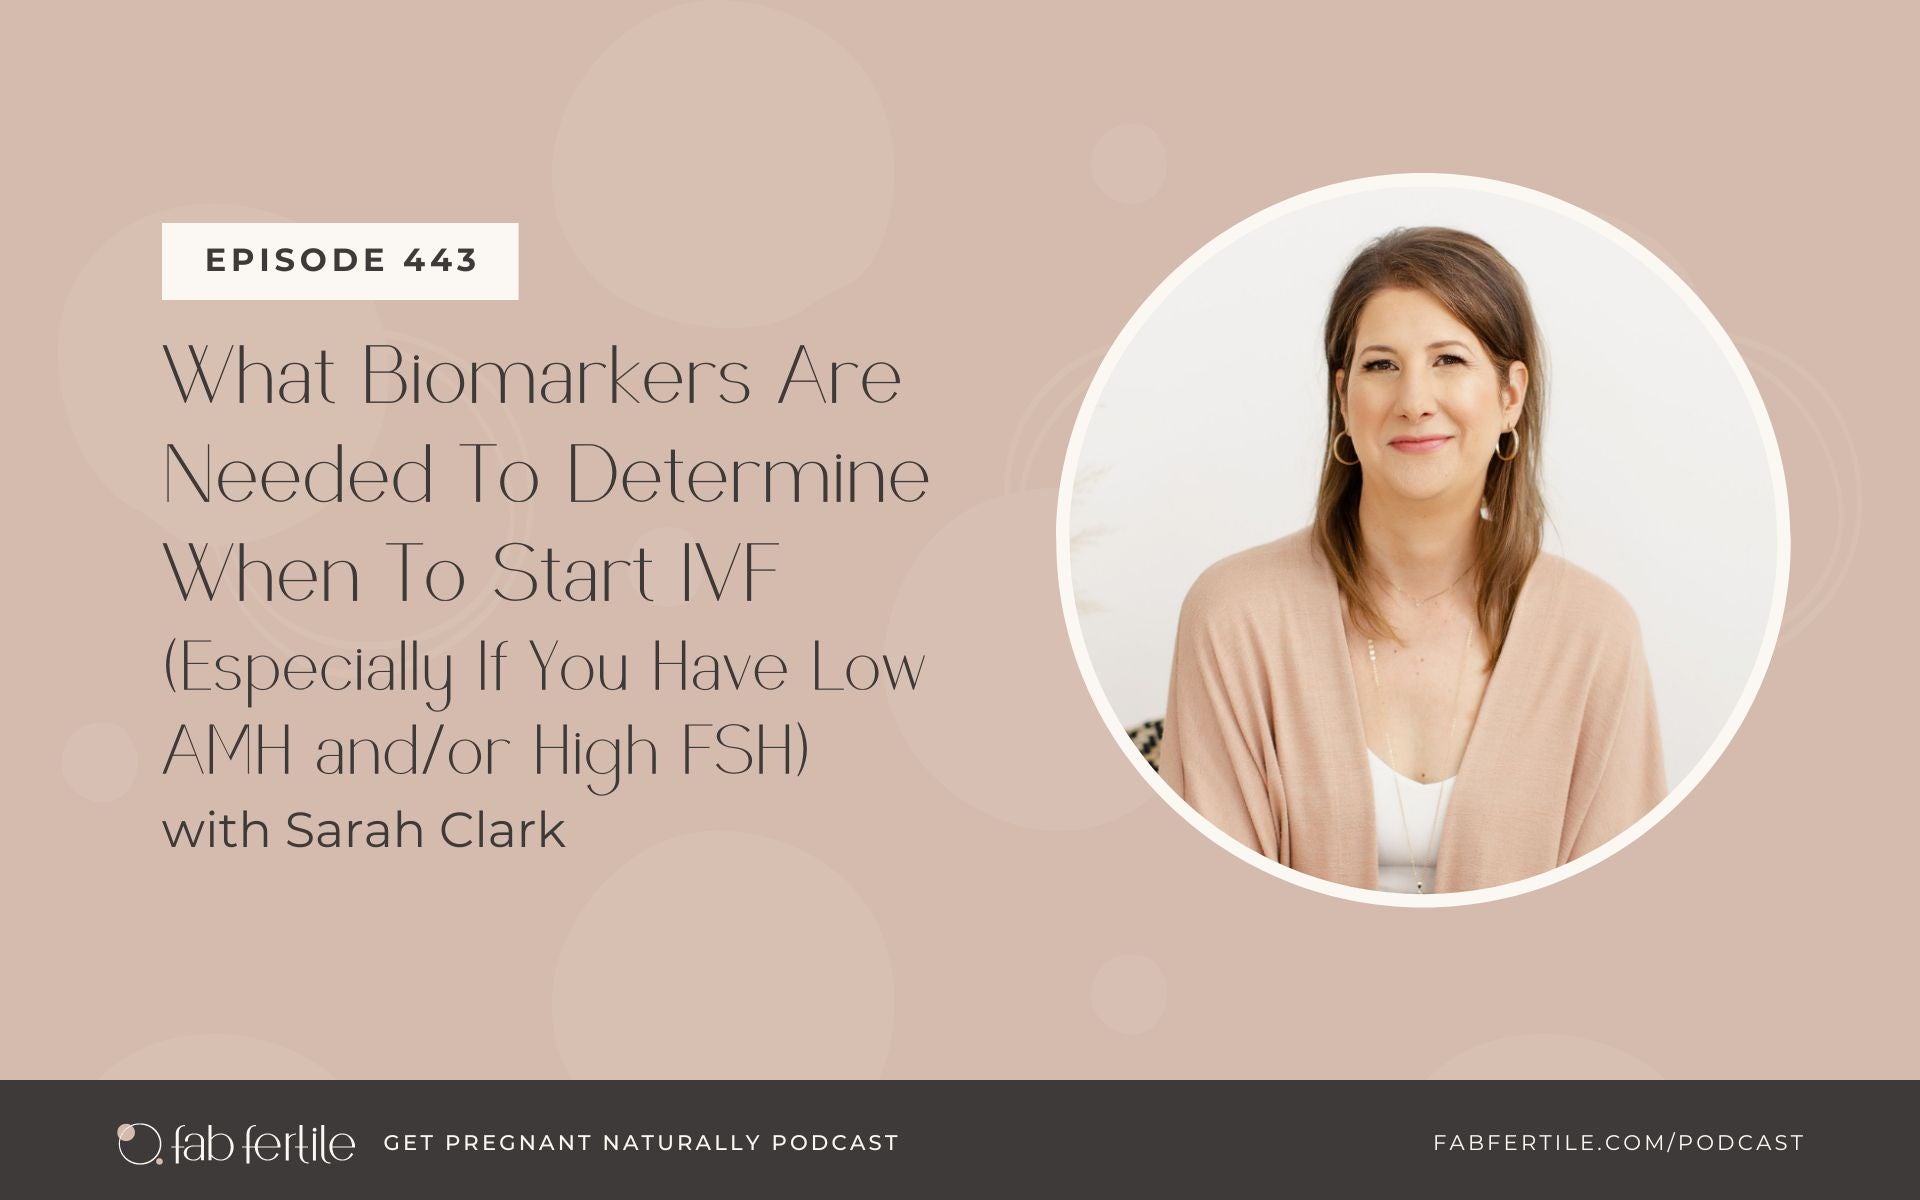 What Biomarkers Are Needed To Determine When To Start IVF (Especially If You Have Low AMH and/or High FSH)